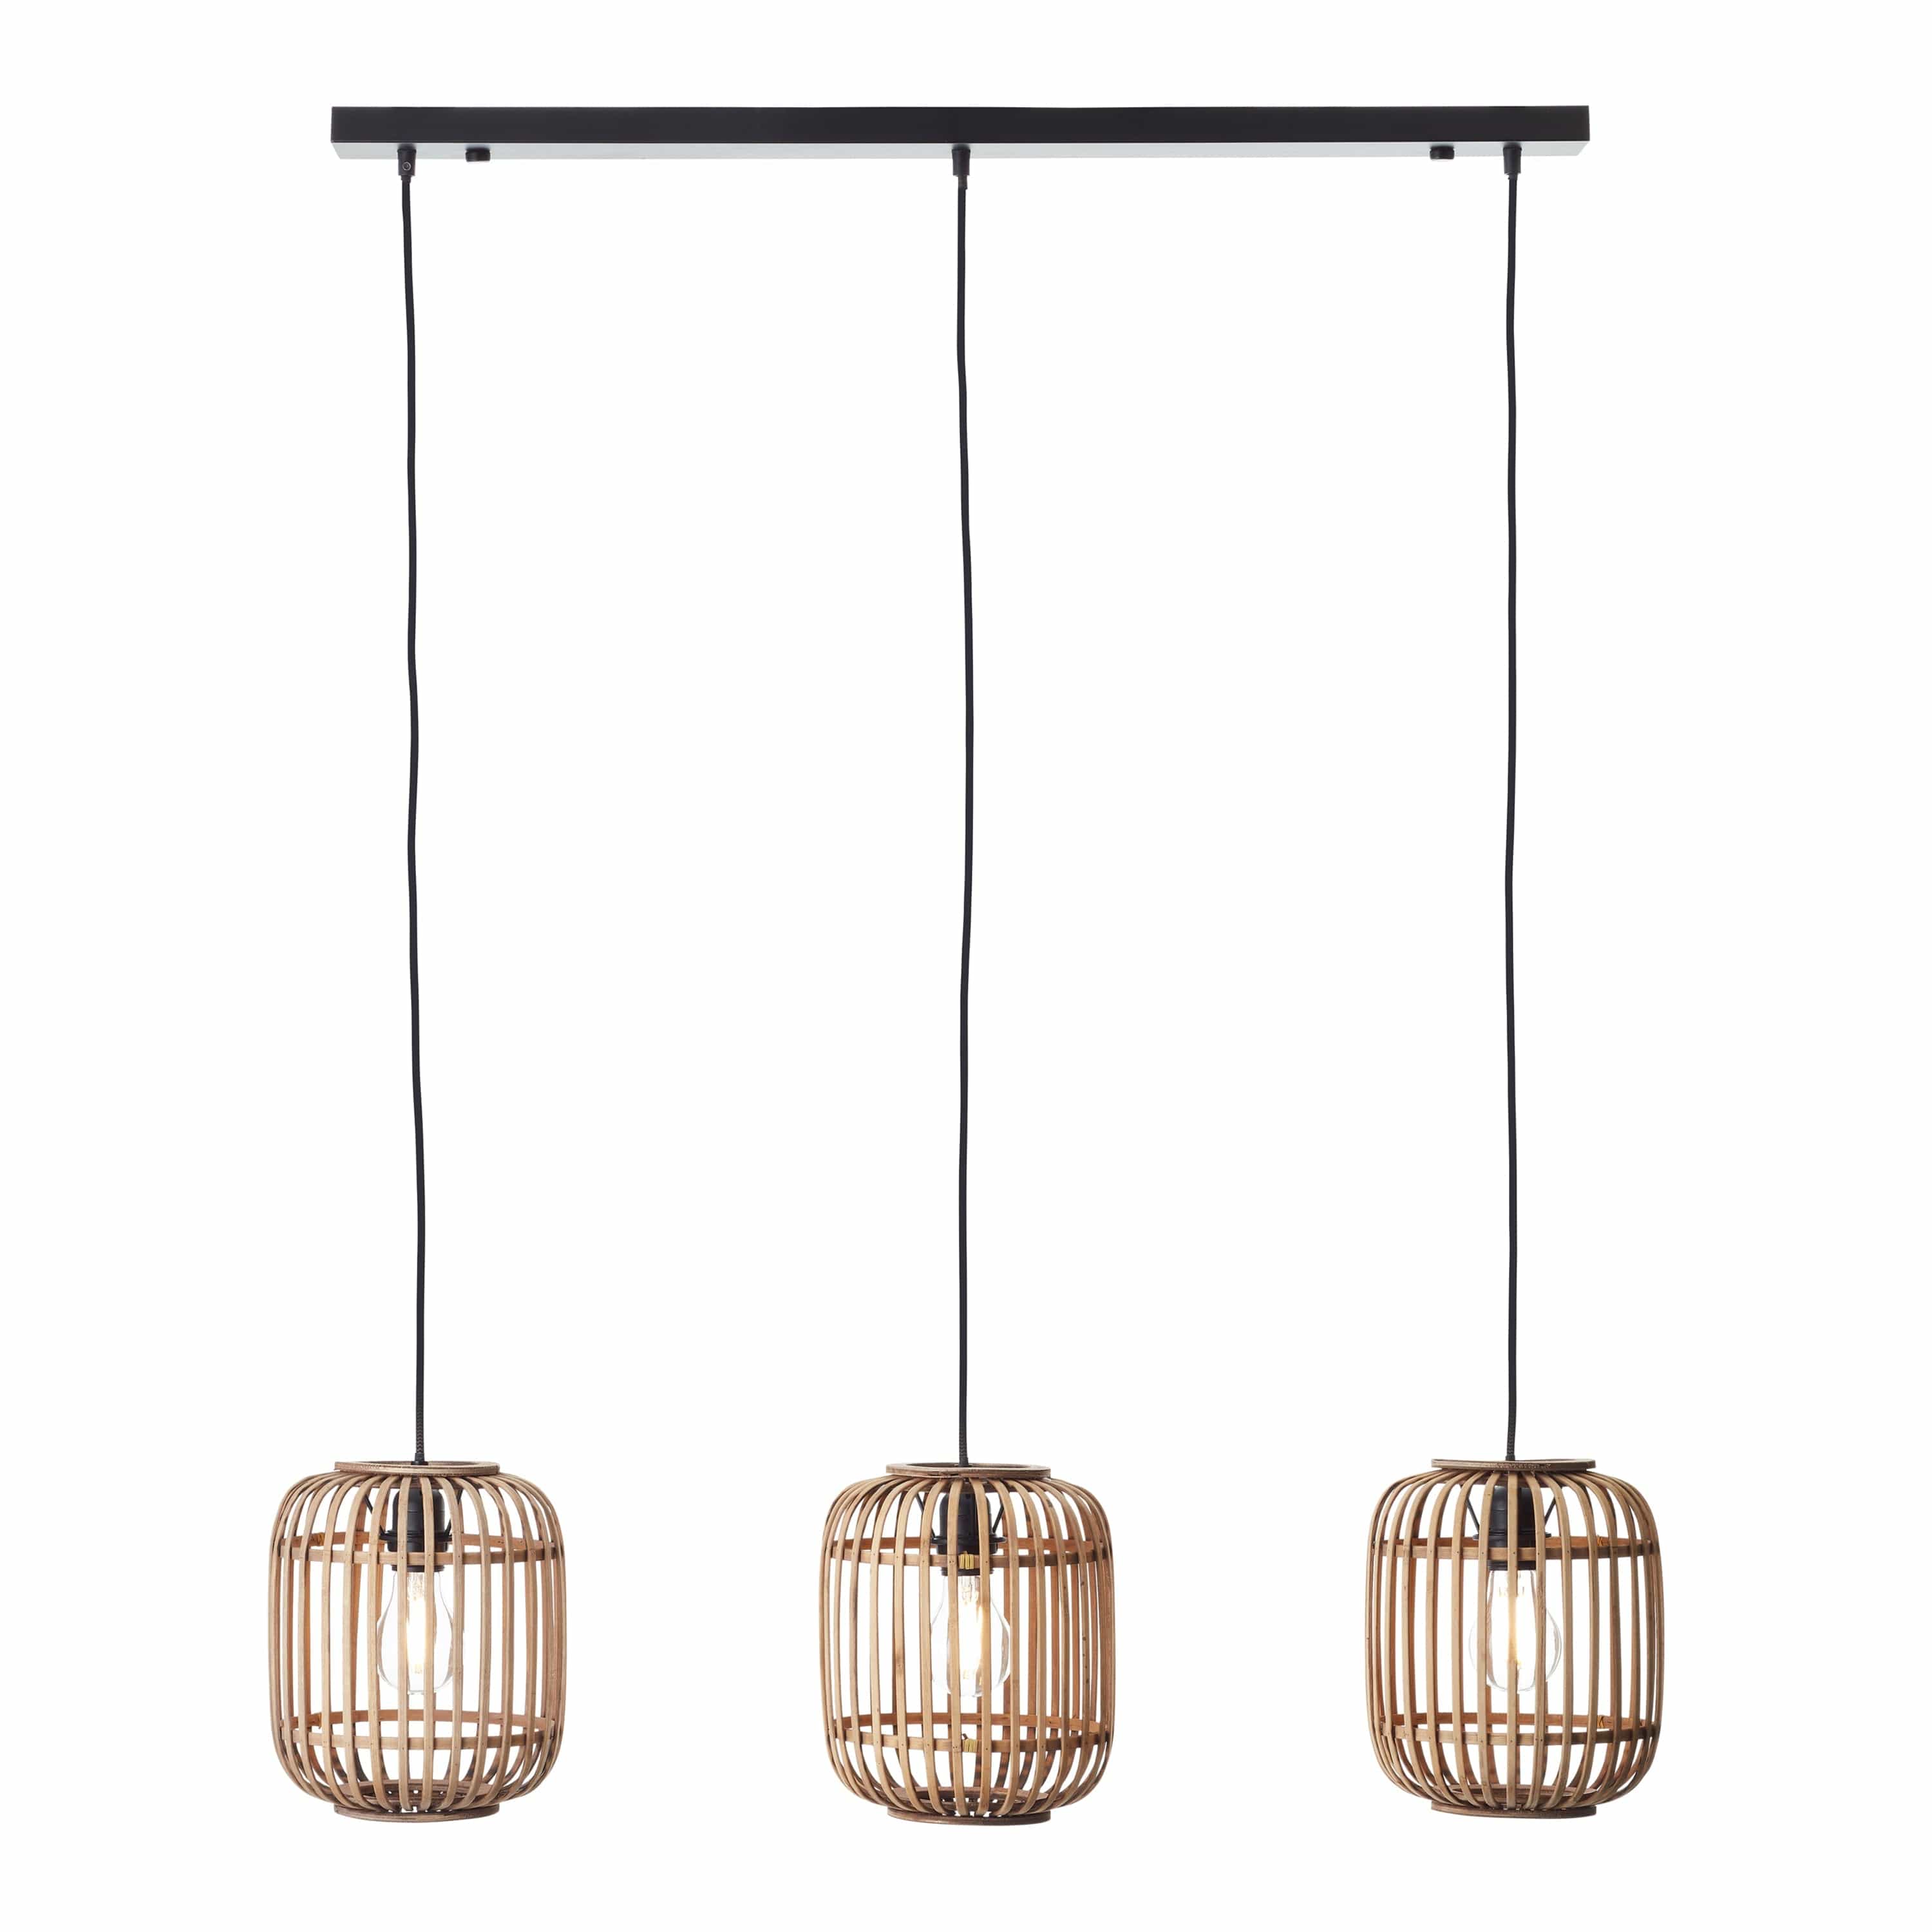 Ethical Bedding Gaia Collection Bamboo 3 Pendant Light in Natural